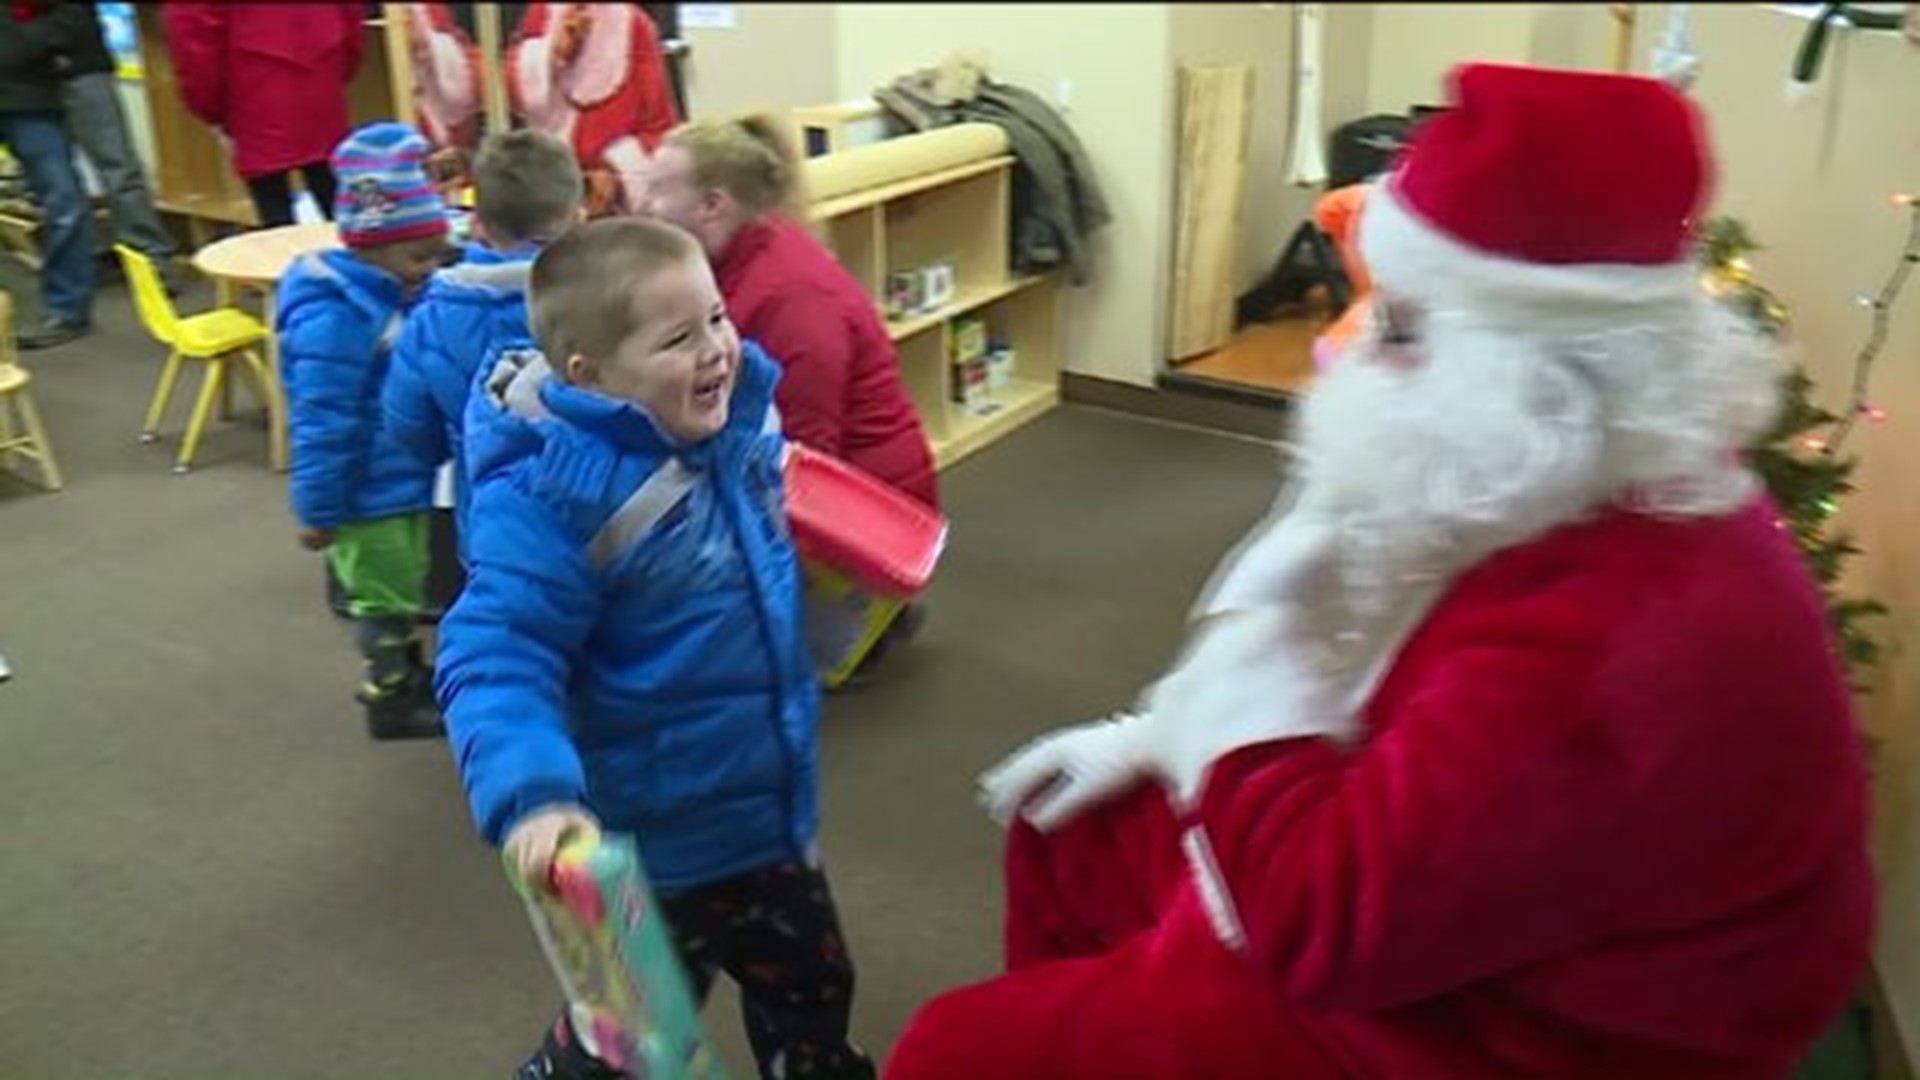 PennDOT`s Special Holiday Project in Scranton